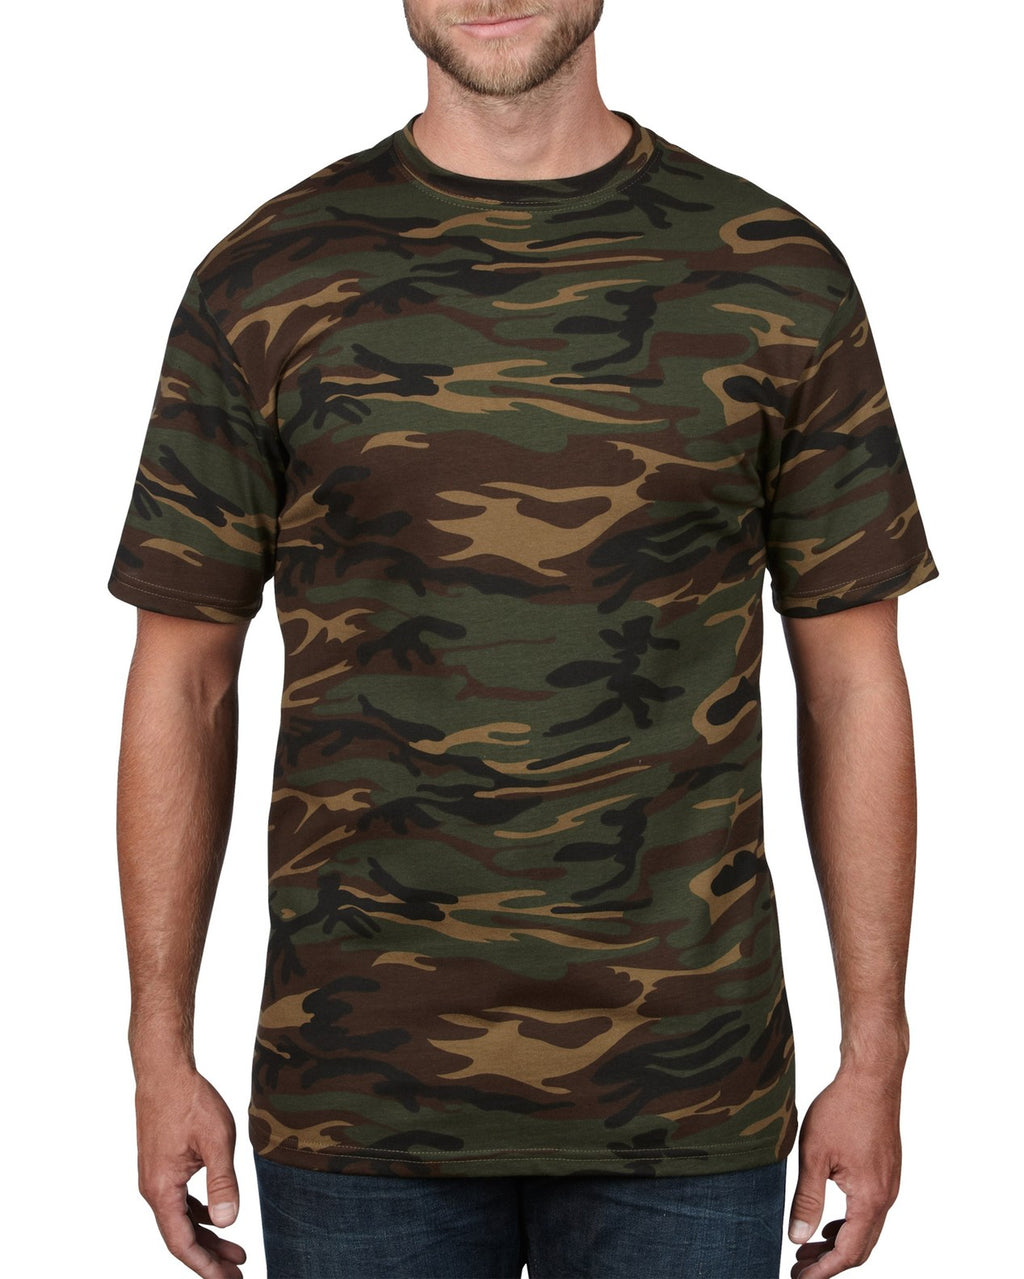 Camo T-shirt 1 Womens Shirt Athletic Shorts Camouflage Army 